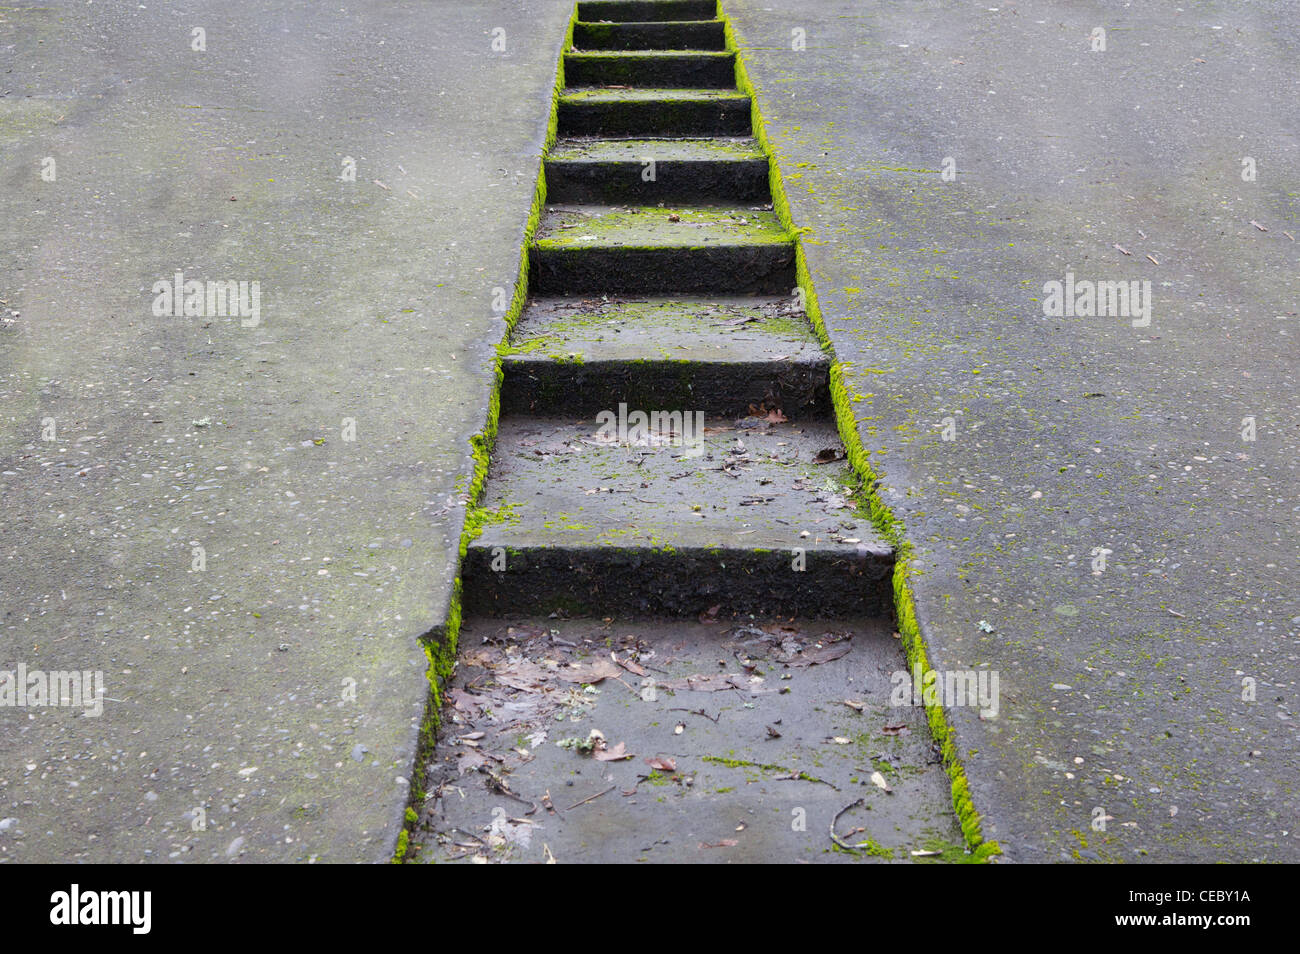 Green moss encrusted concrete driveway with sunken stairway Stock Photo